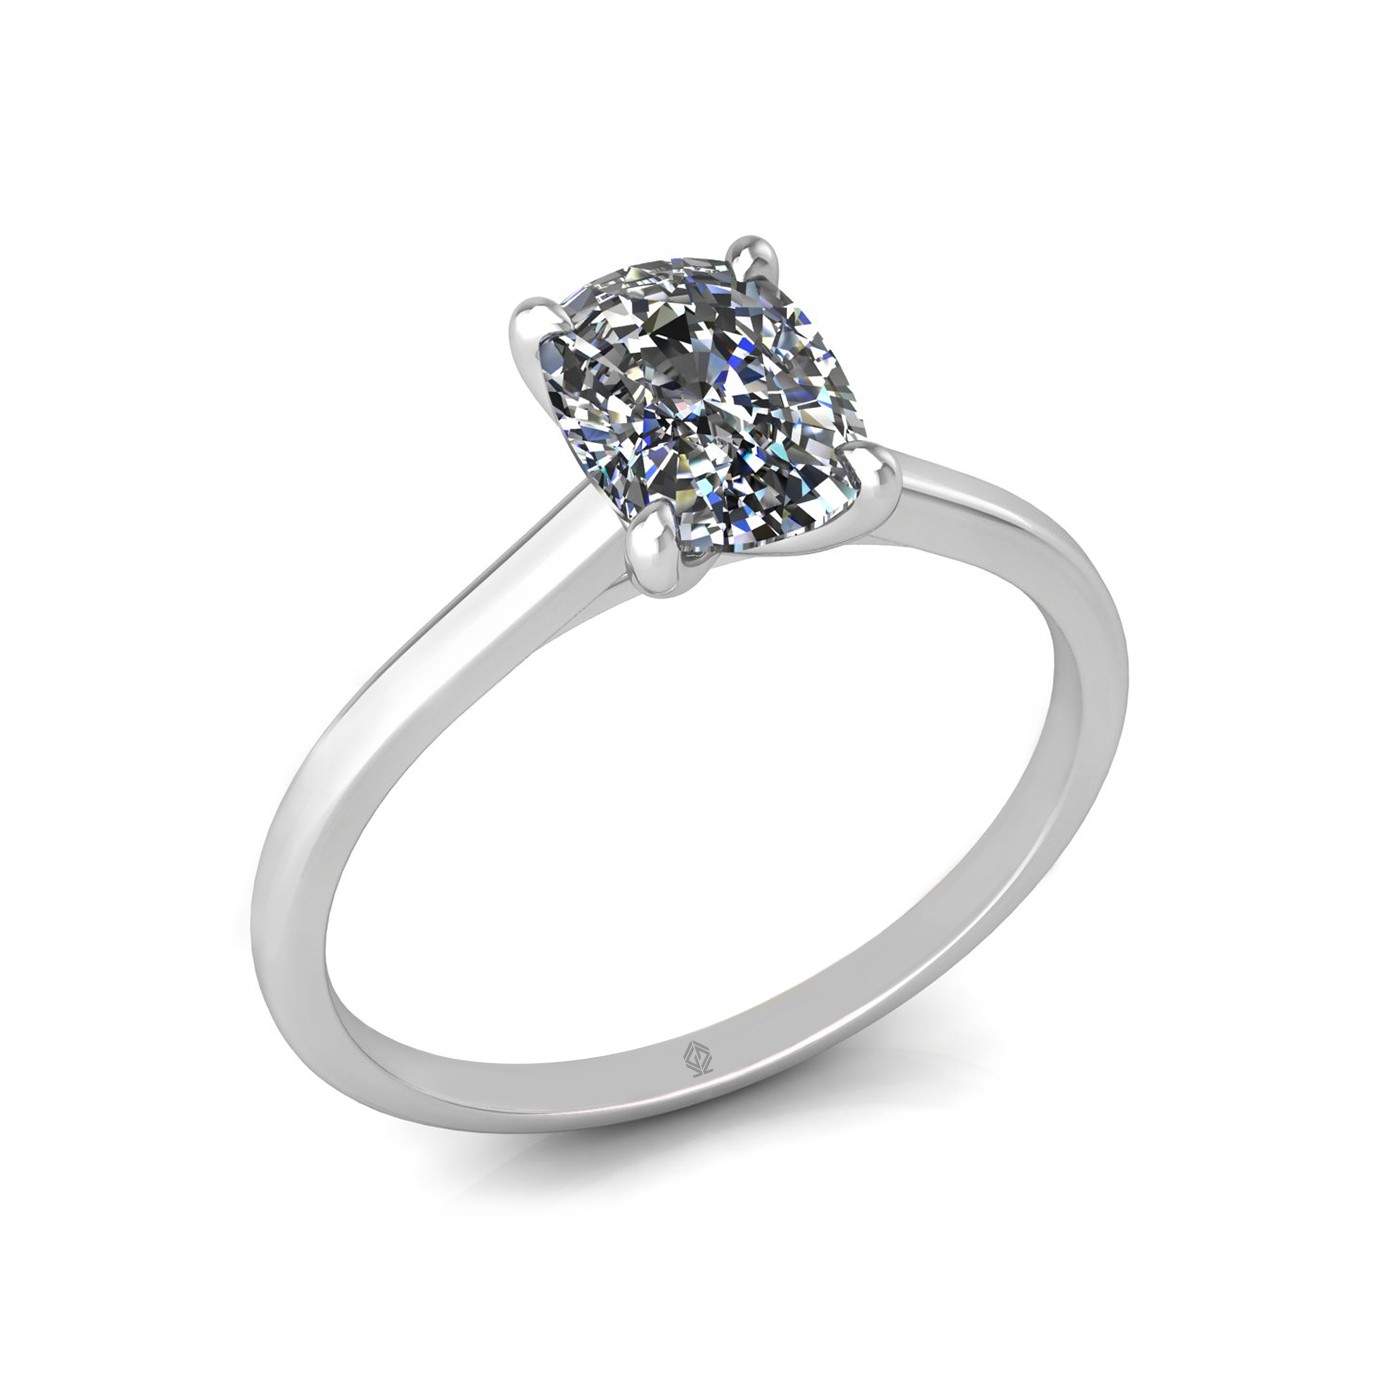 18k white gold  1.50 ct 4 prongs solitaire elongated cushion cut diamond engagement ring with whisper thin band